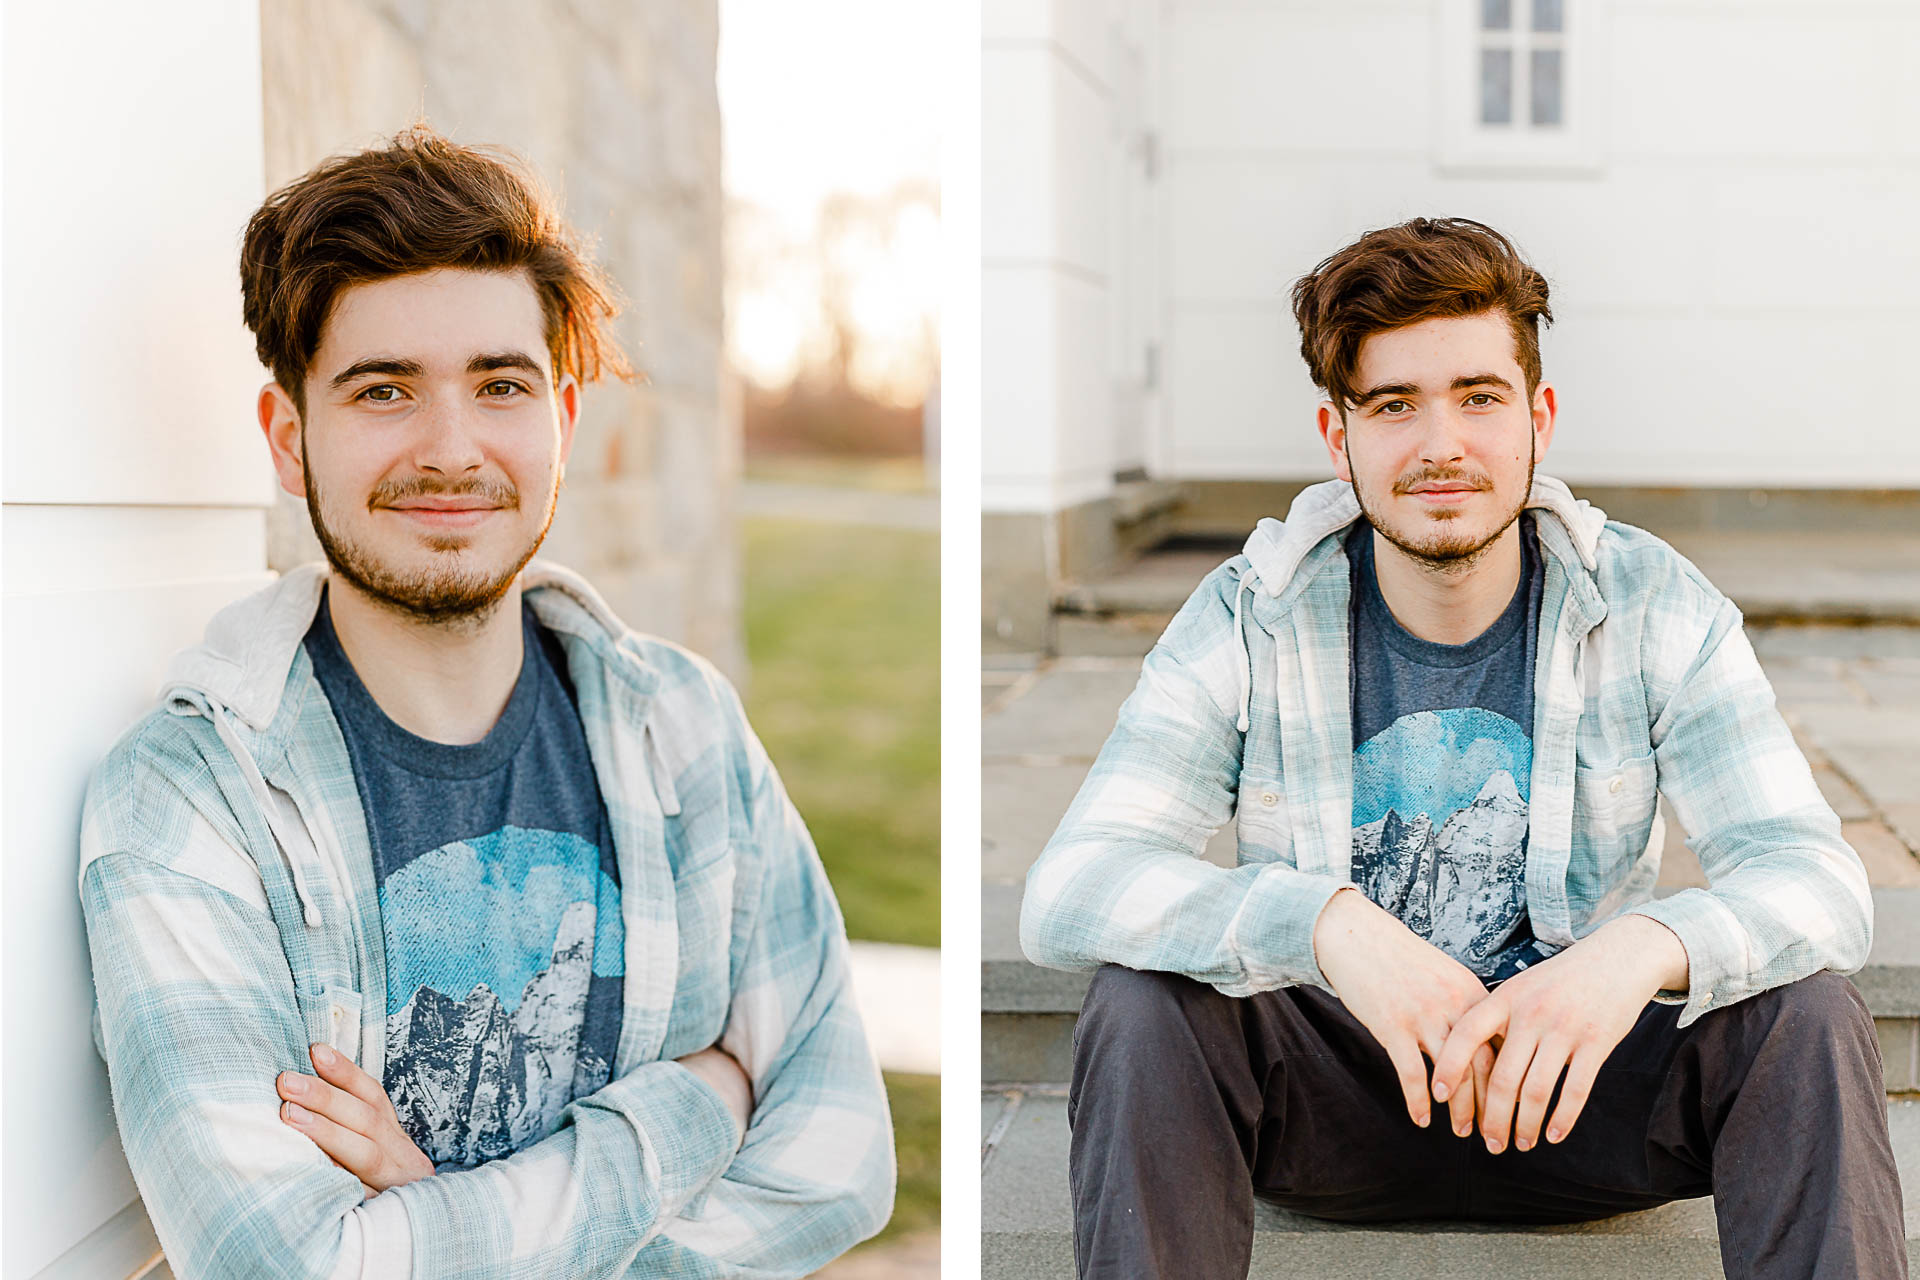 Downtown Scituate Senior Portraits by Christina Runnals Photography